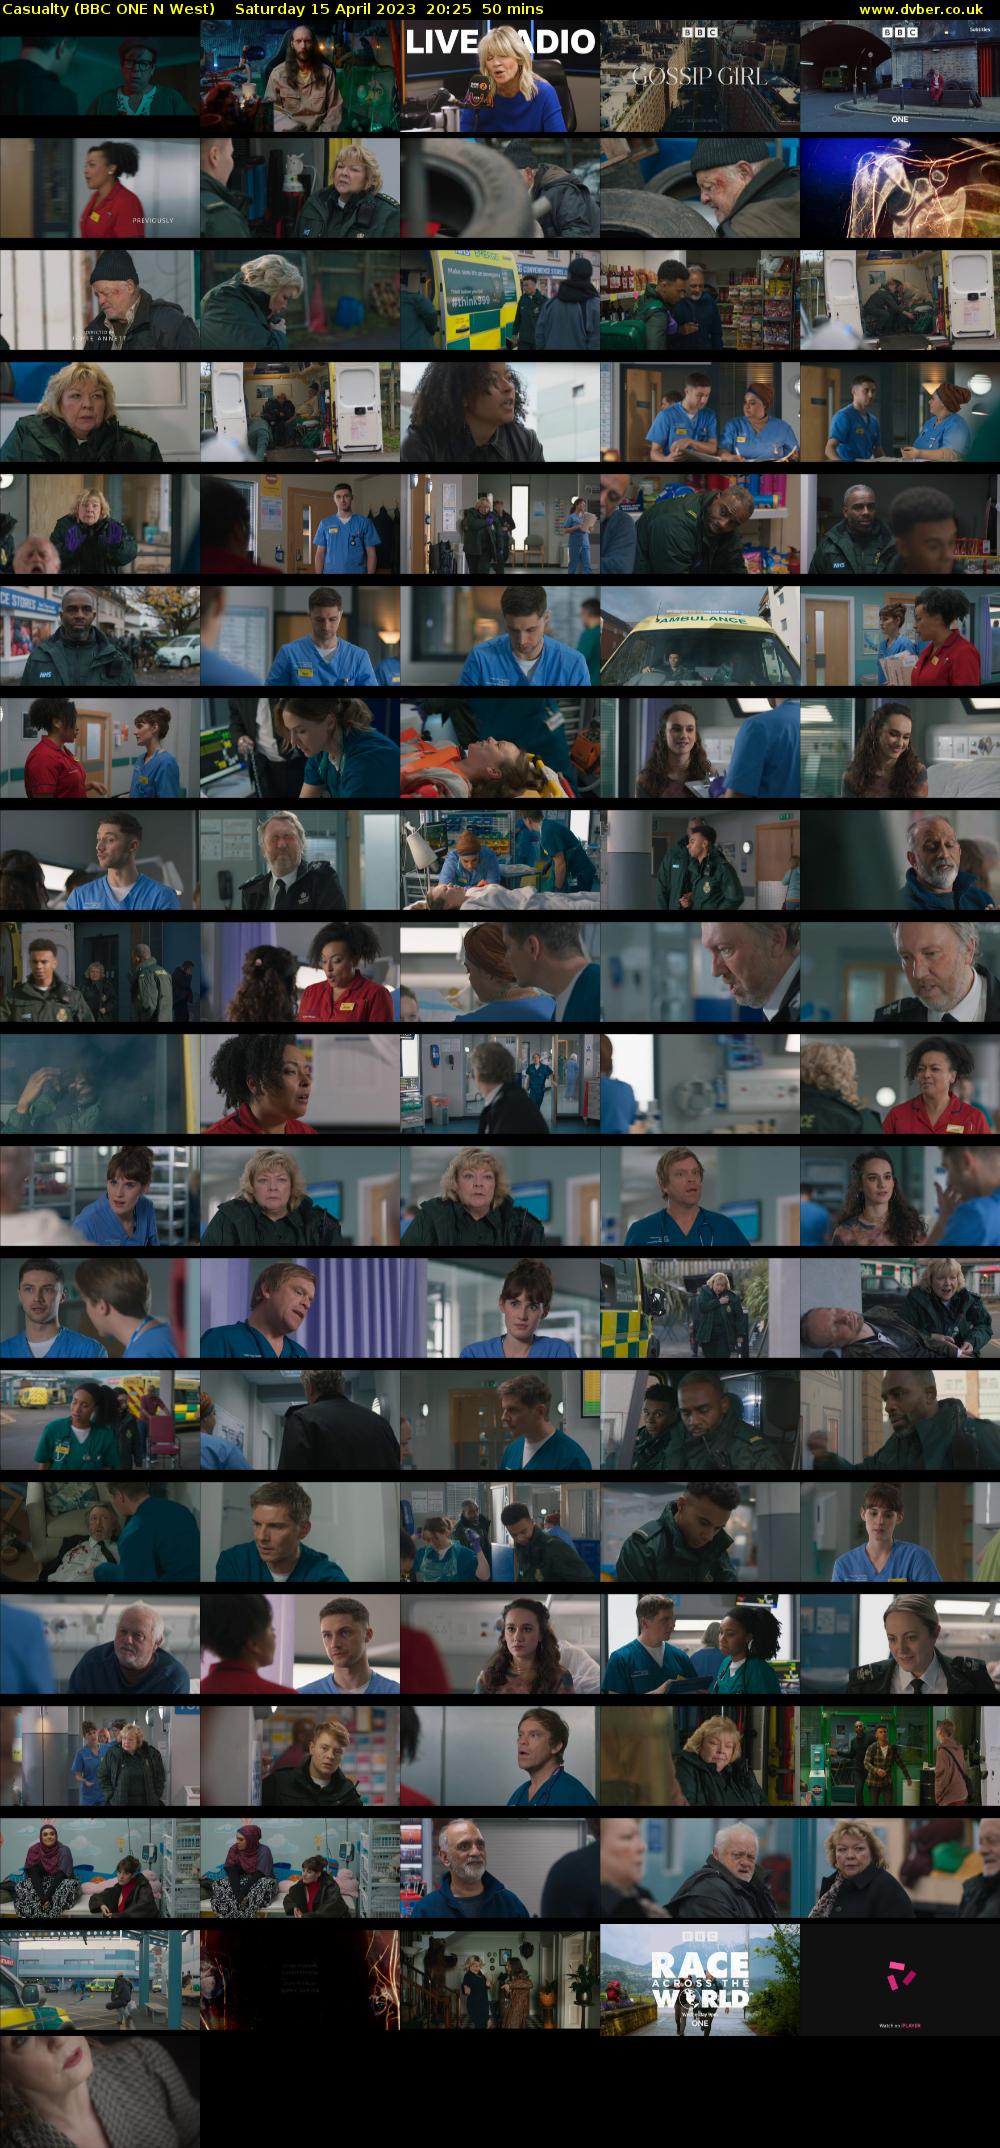 Casualty (BBC ONE N West) Saturday 15 April 2023 20:25 - 21:15